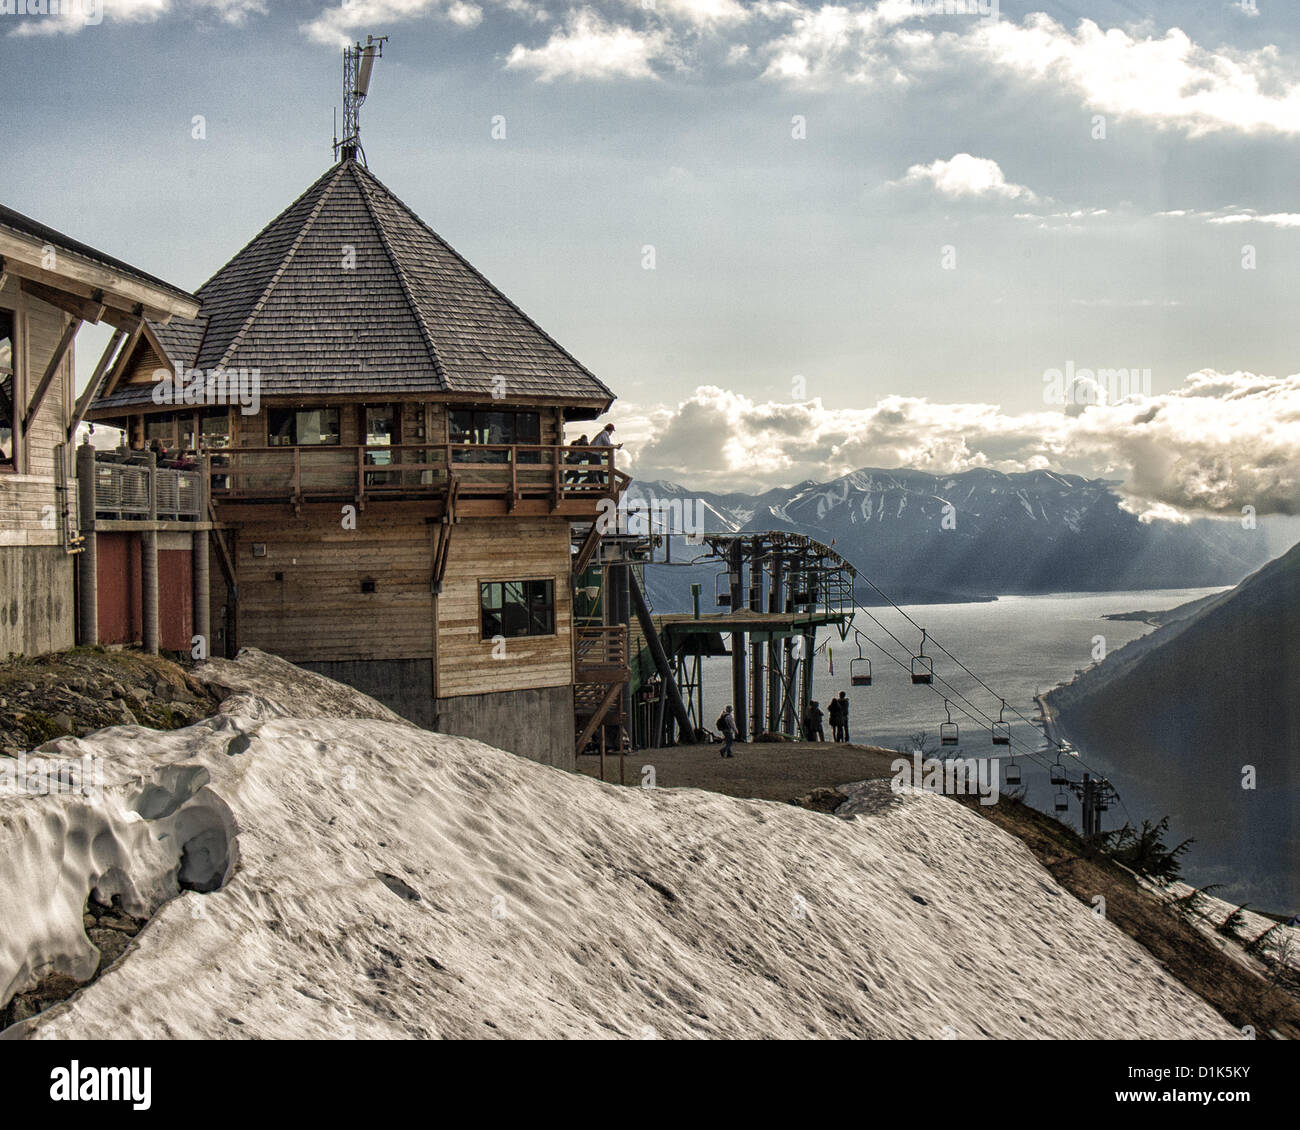 June 30, 2012 - Girdwood, Alaska, US - The Roundhouse, one of the interconnected buildings of the Mt Alyeska Upper Tram Terminal, 2,334 ft (711 m) above sea level, with its sweeping view in the distance of the dramatic Kenai Mountain Range and Turnagain Arm, a 50 mi [80 km] fjord fed by Cook Inlet. Located in Girdwood, Alaska, 27 miles (44Â km) from Anchorage, Mt. Alyeska is the biggest ski mountain in the state. (Credit Image: © Arnold Drapkin/ZUMAPRESS.com) Stock Photo